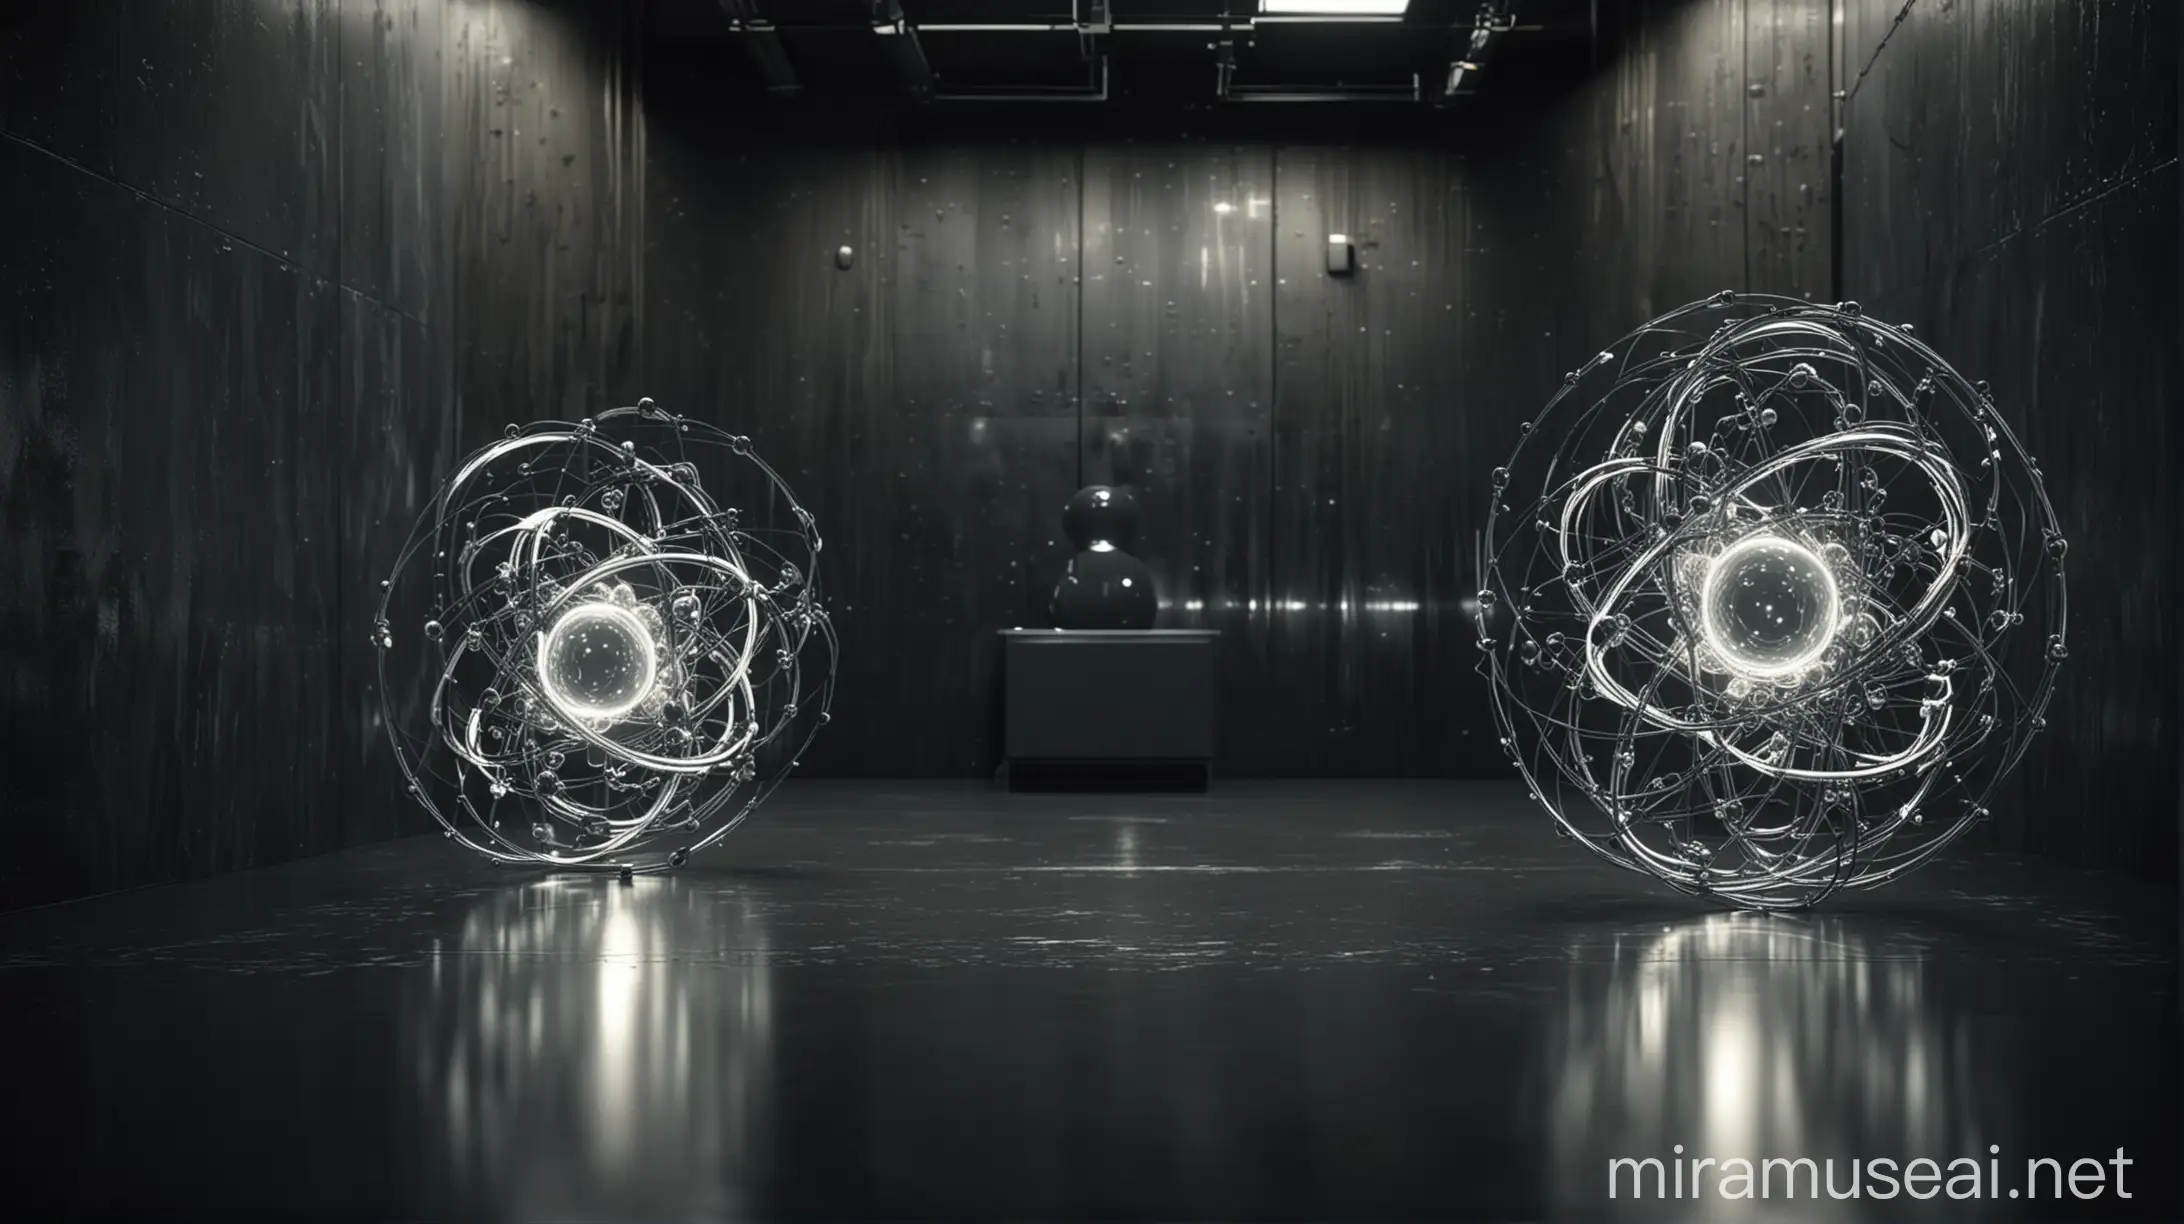 Two glowing atoms in a dimly lit, futuristic room with dark metallic walls. The atoms are interacting through visible quantum waves, illuminating the space with bright white light, blending old scientific aesthetics with advanced technology
